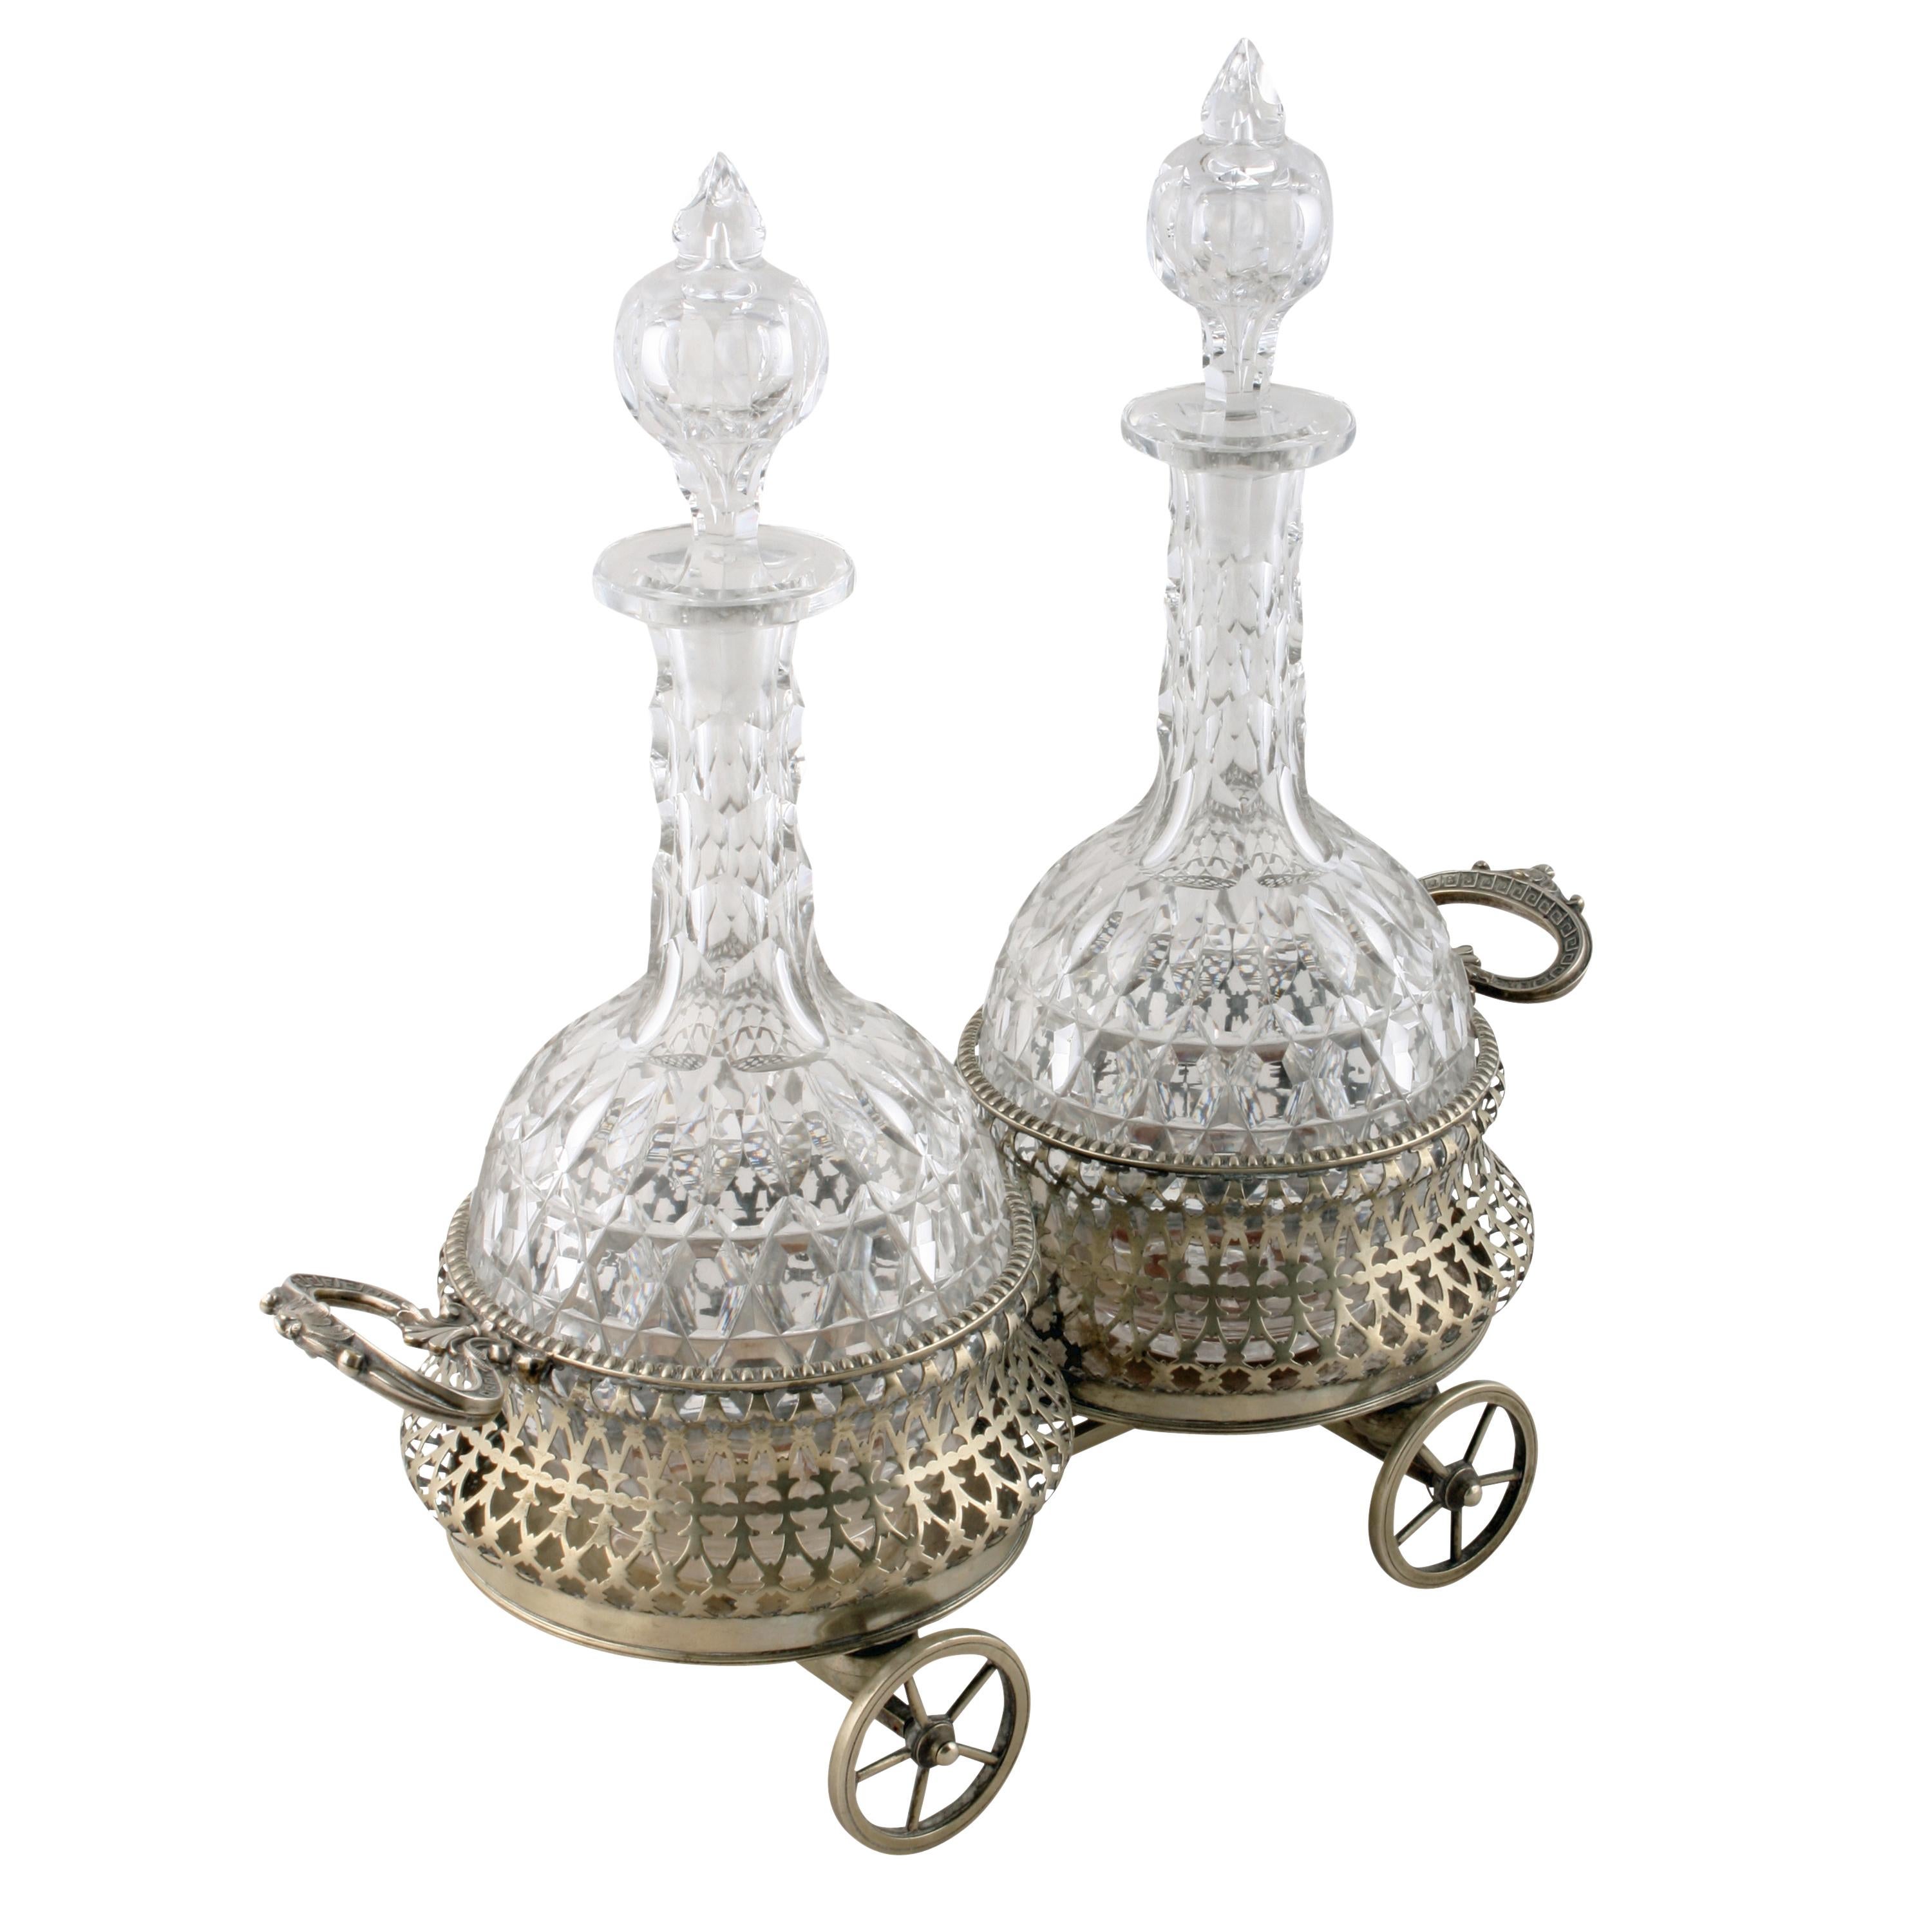 Silver Plated Coaster Wagon and Decanters